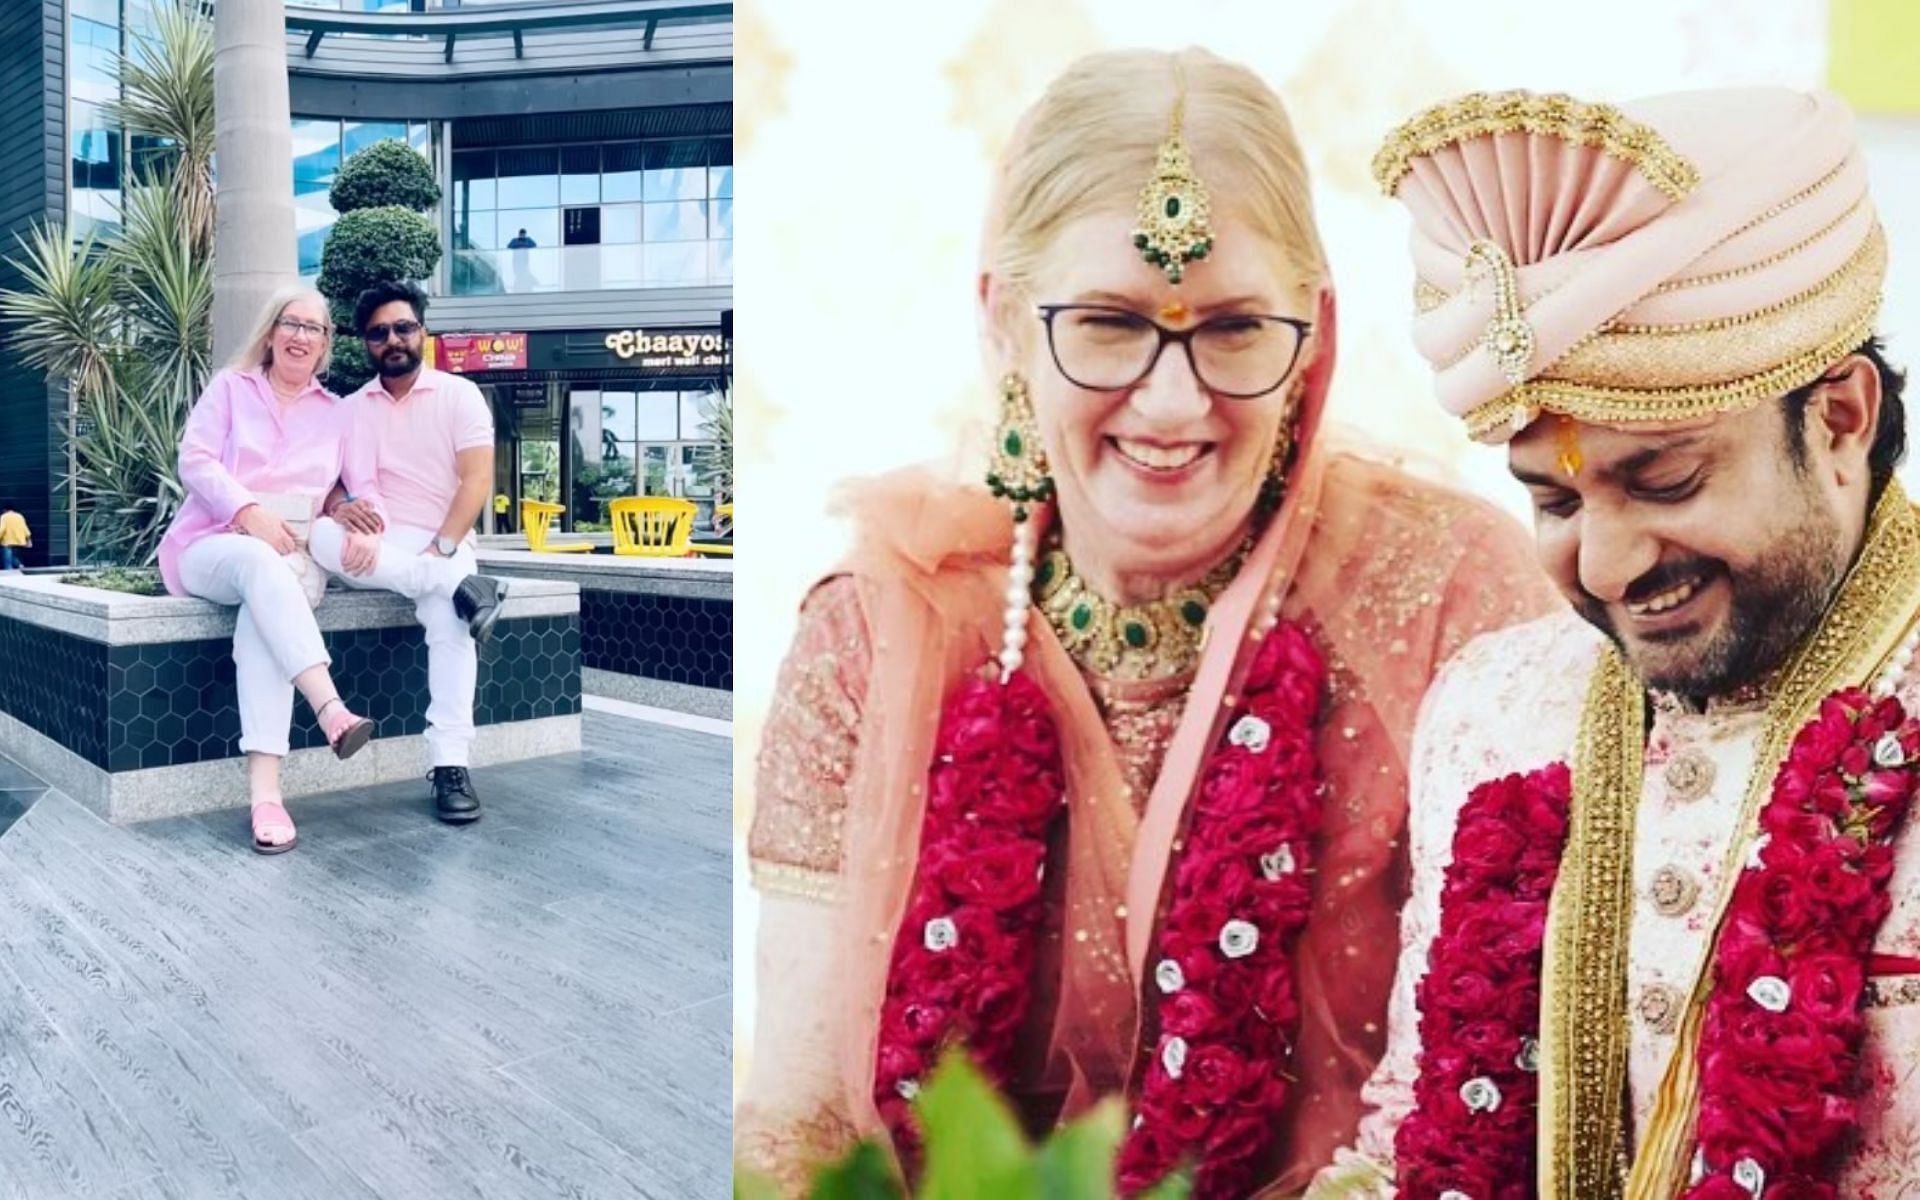 Jenny wants Sumit to spend all of his time with her (Images via sumitjenny/ Instagram)